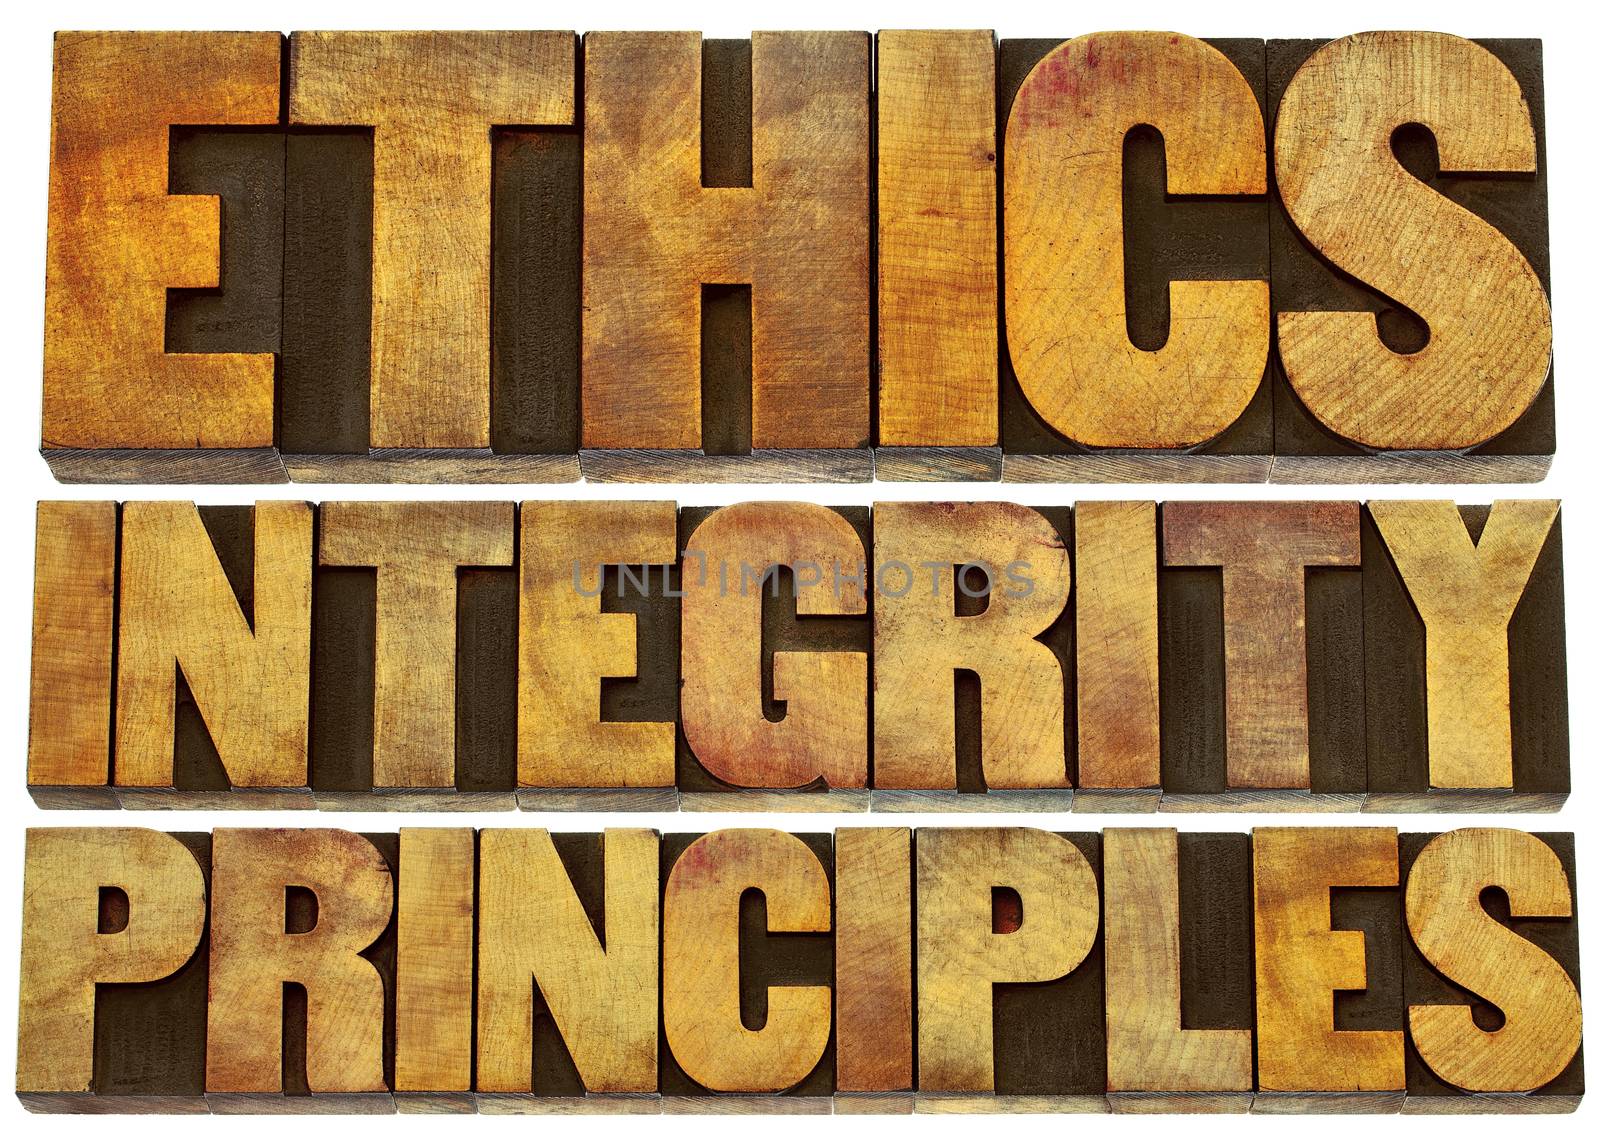 ethics, integrity and principles in wood type by PixelsAway